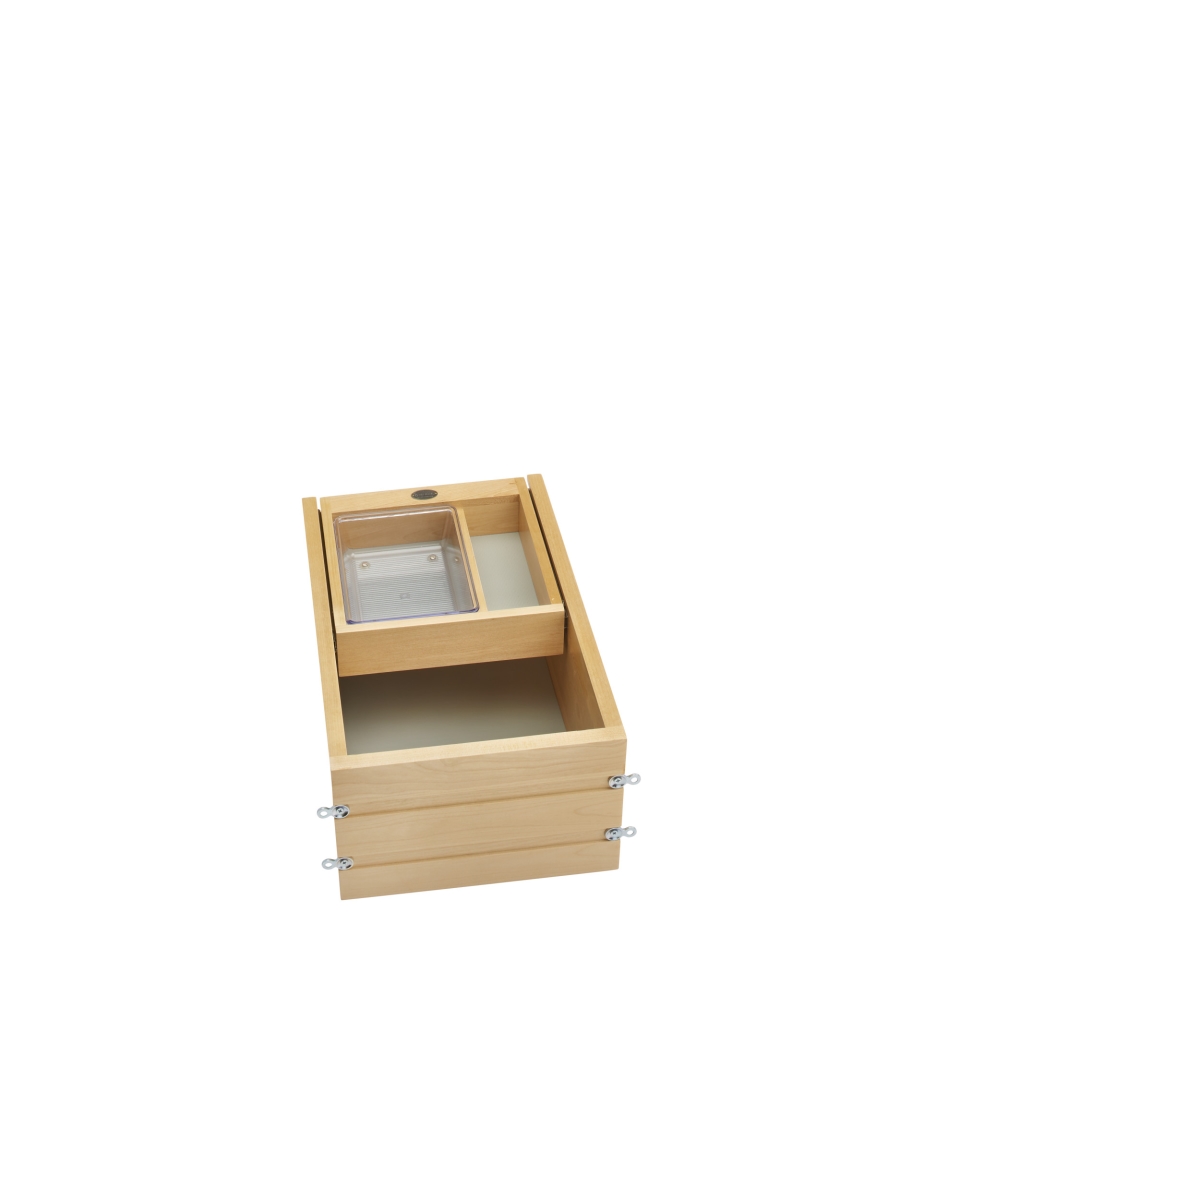 Rev A Shelf Rs4vdoht.15 Half Tiered Top Shelf With Bins, Maple - 8 X 12 X 18.68 In.